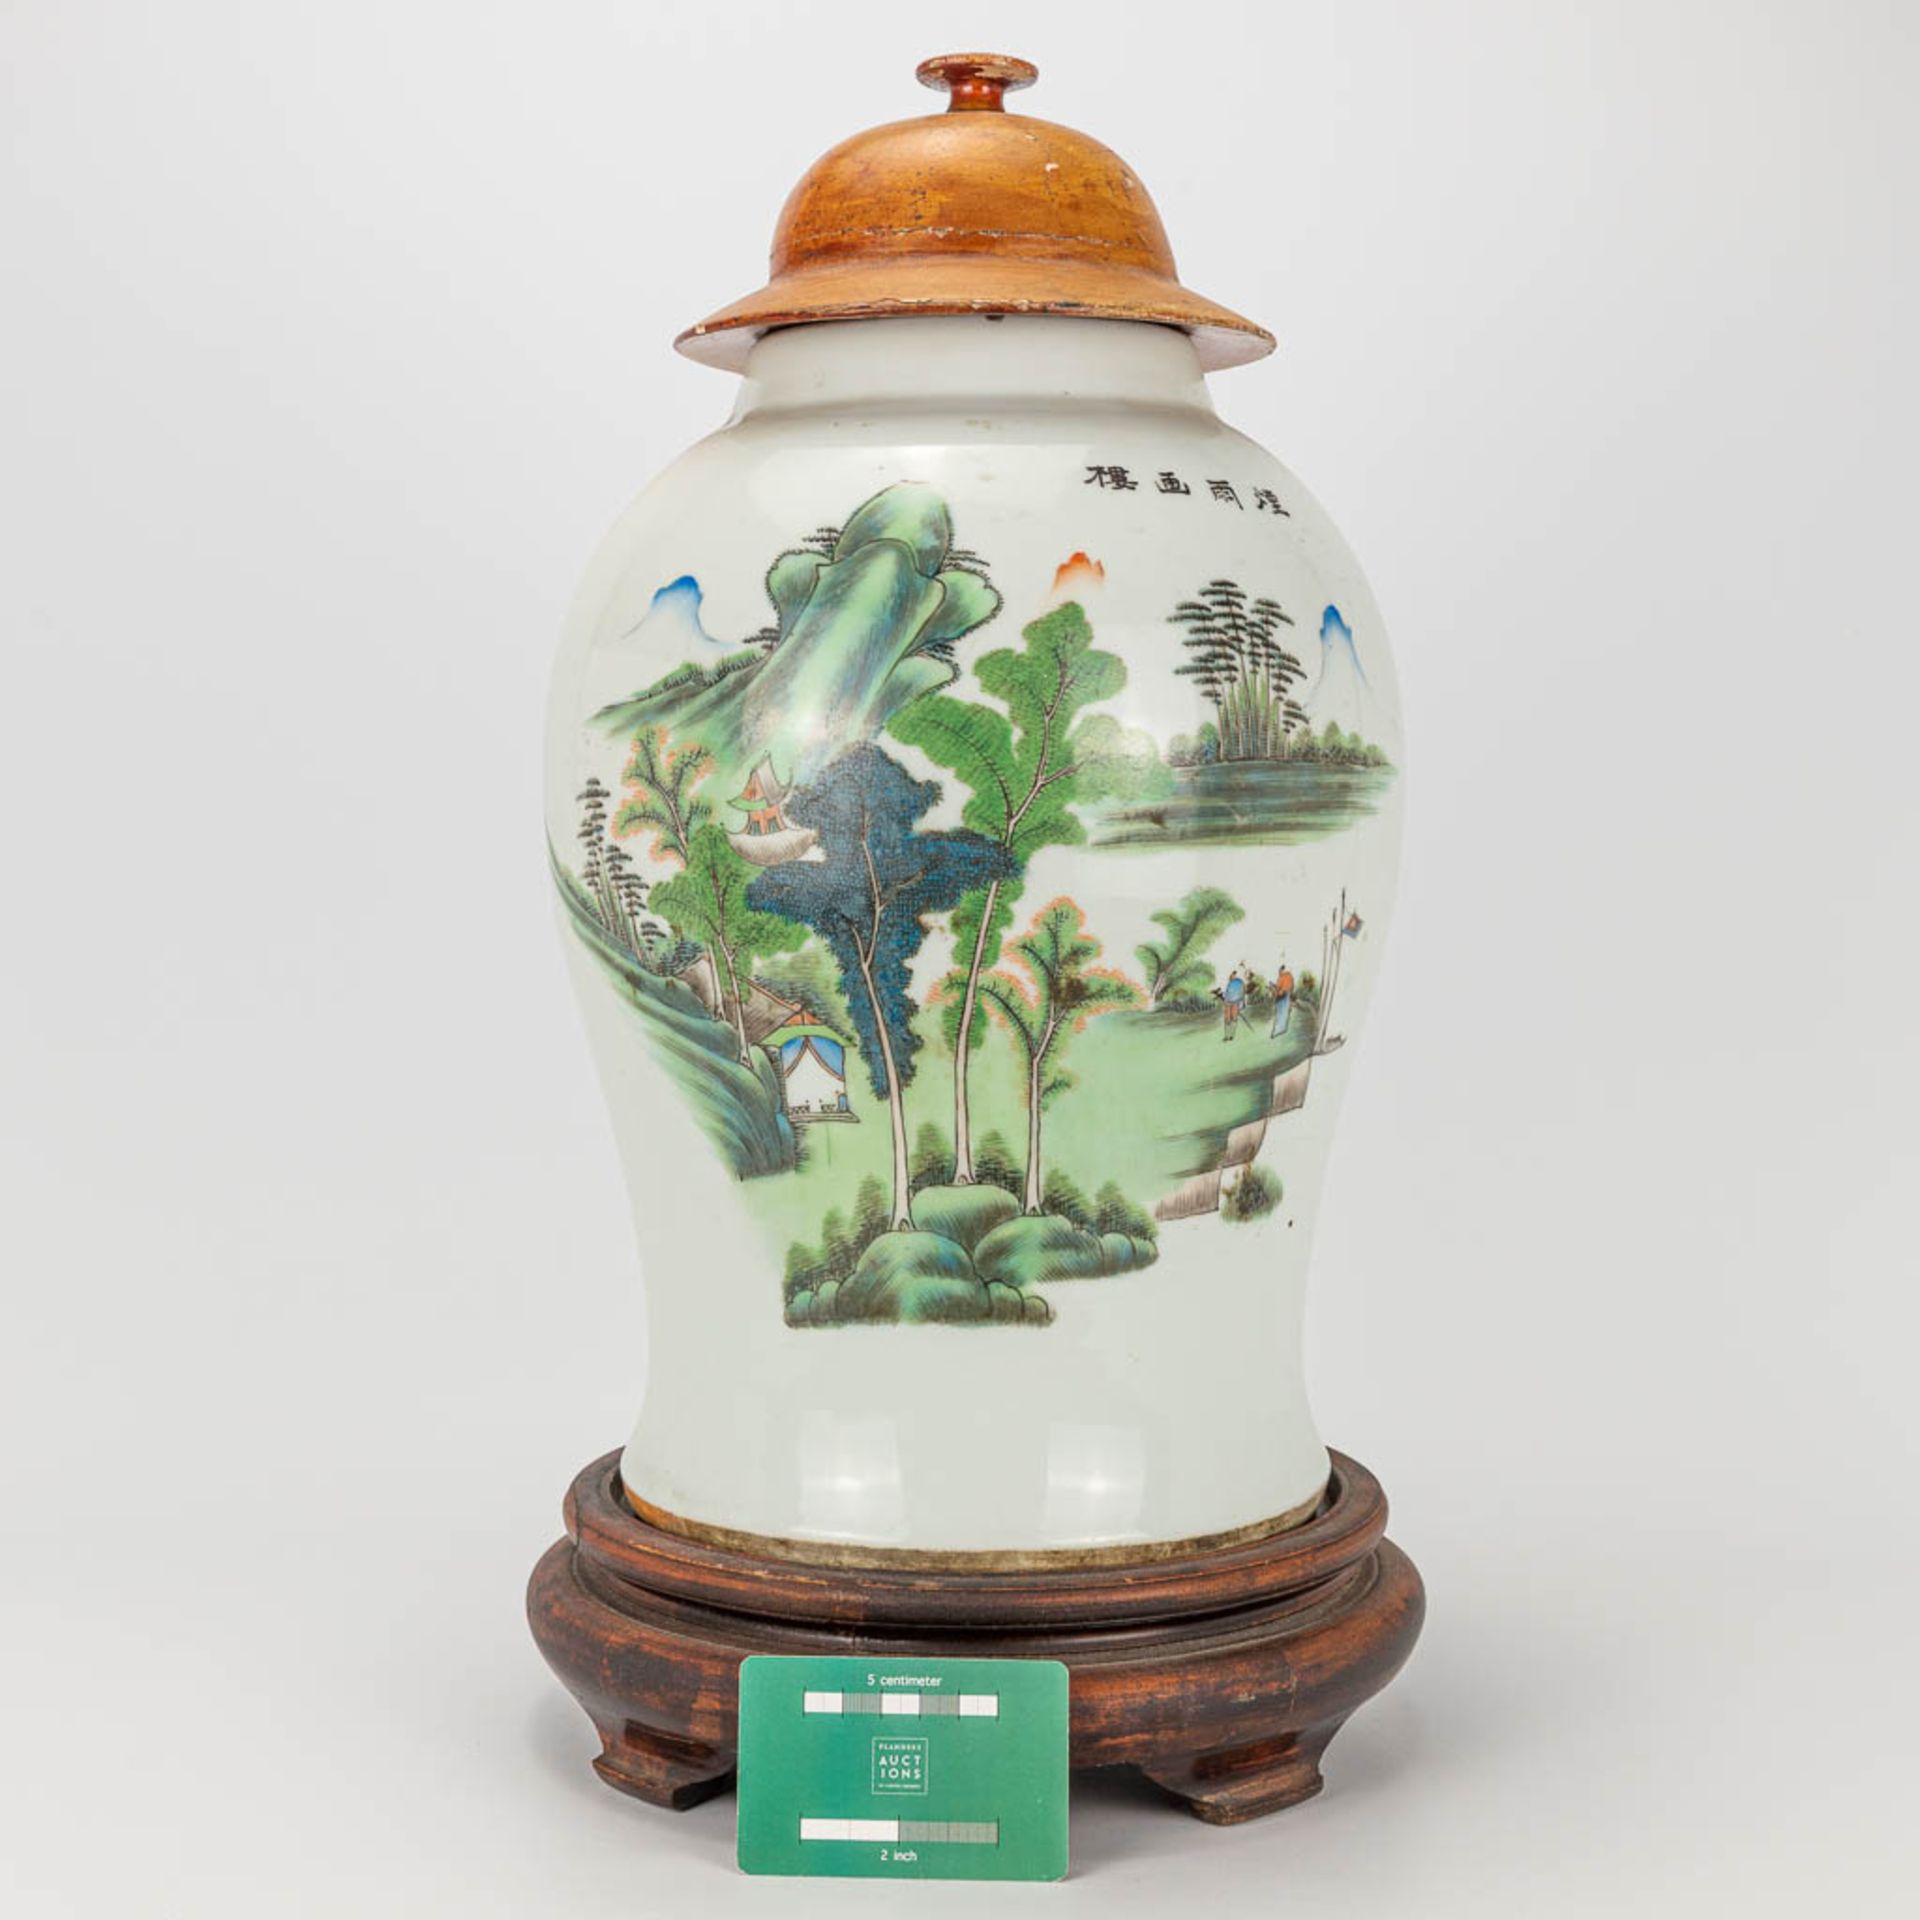 A vase with lid made of Chinese porcelain and decorated with landscapes - Image 2 of 19